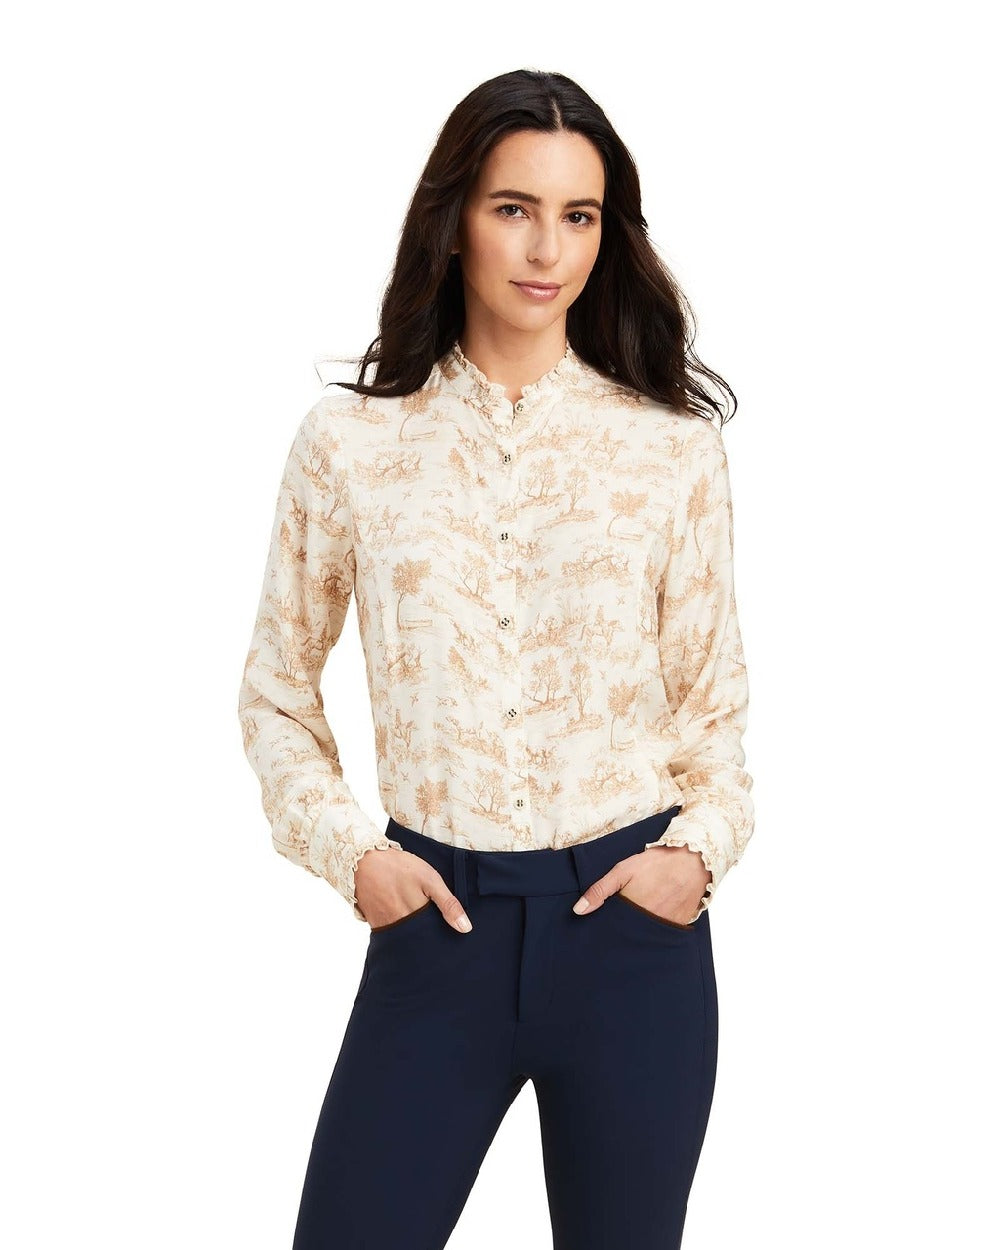 Toile Ariat Womens Clarion Blouse on White background 